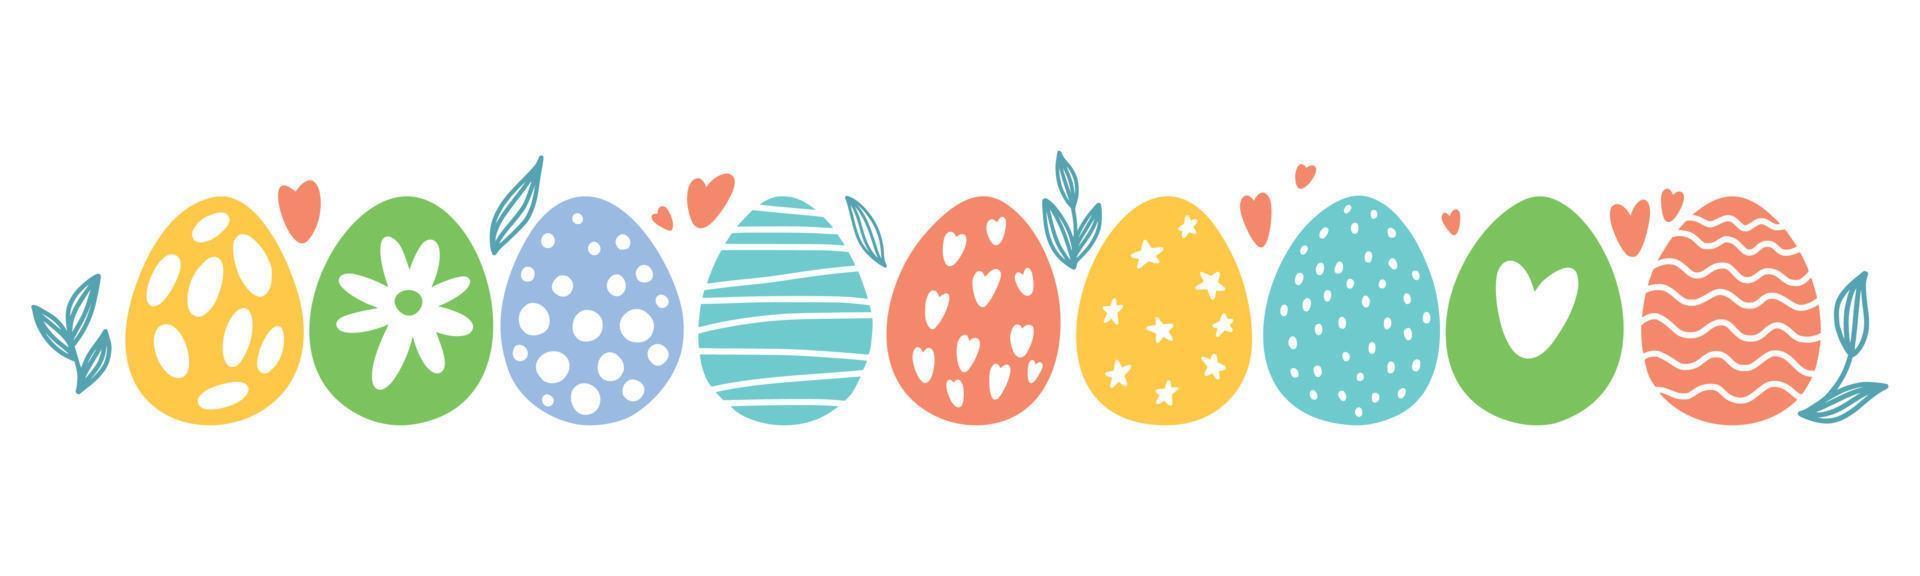 Vector Easter pattern with drawings of Easter eggs drawn by hand